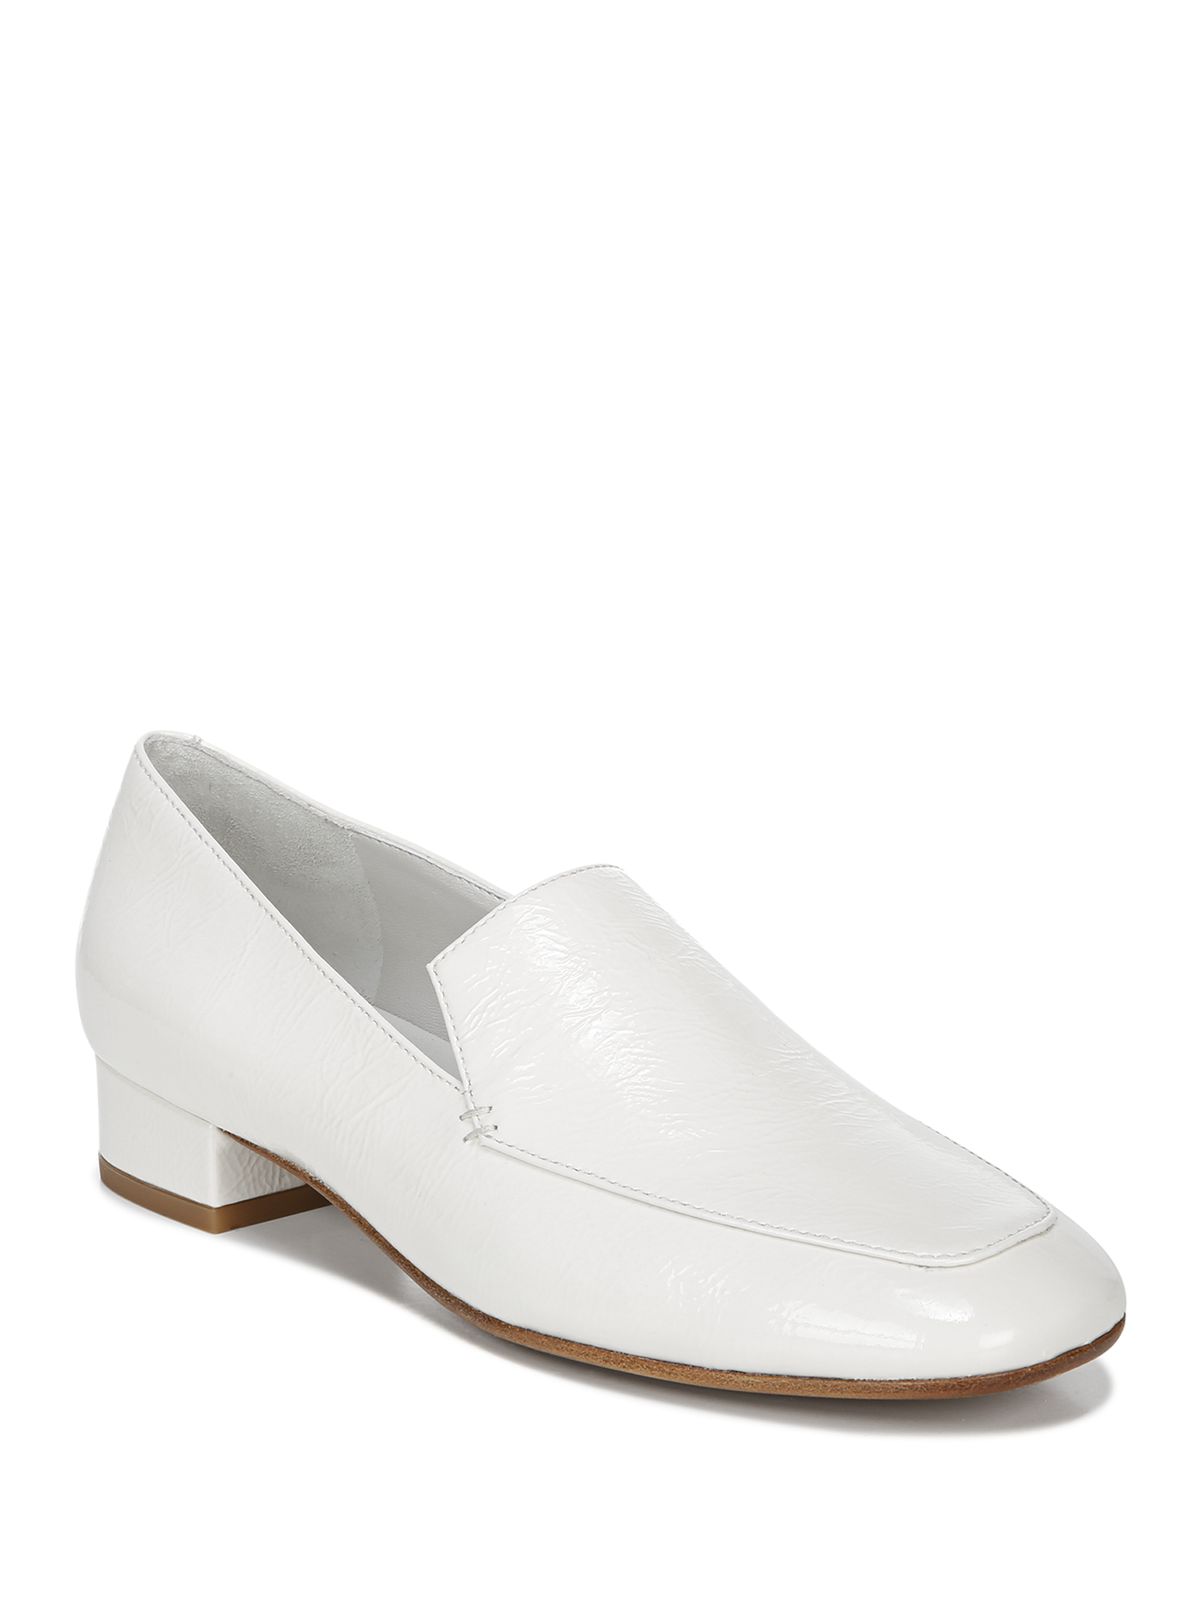 VINCE. Womens White Padded Fauna Square Toe Block Heel Slip On Leather Flats Shoes 5.5 M